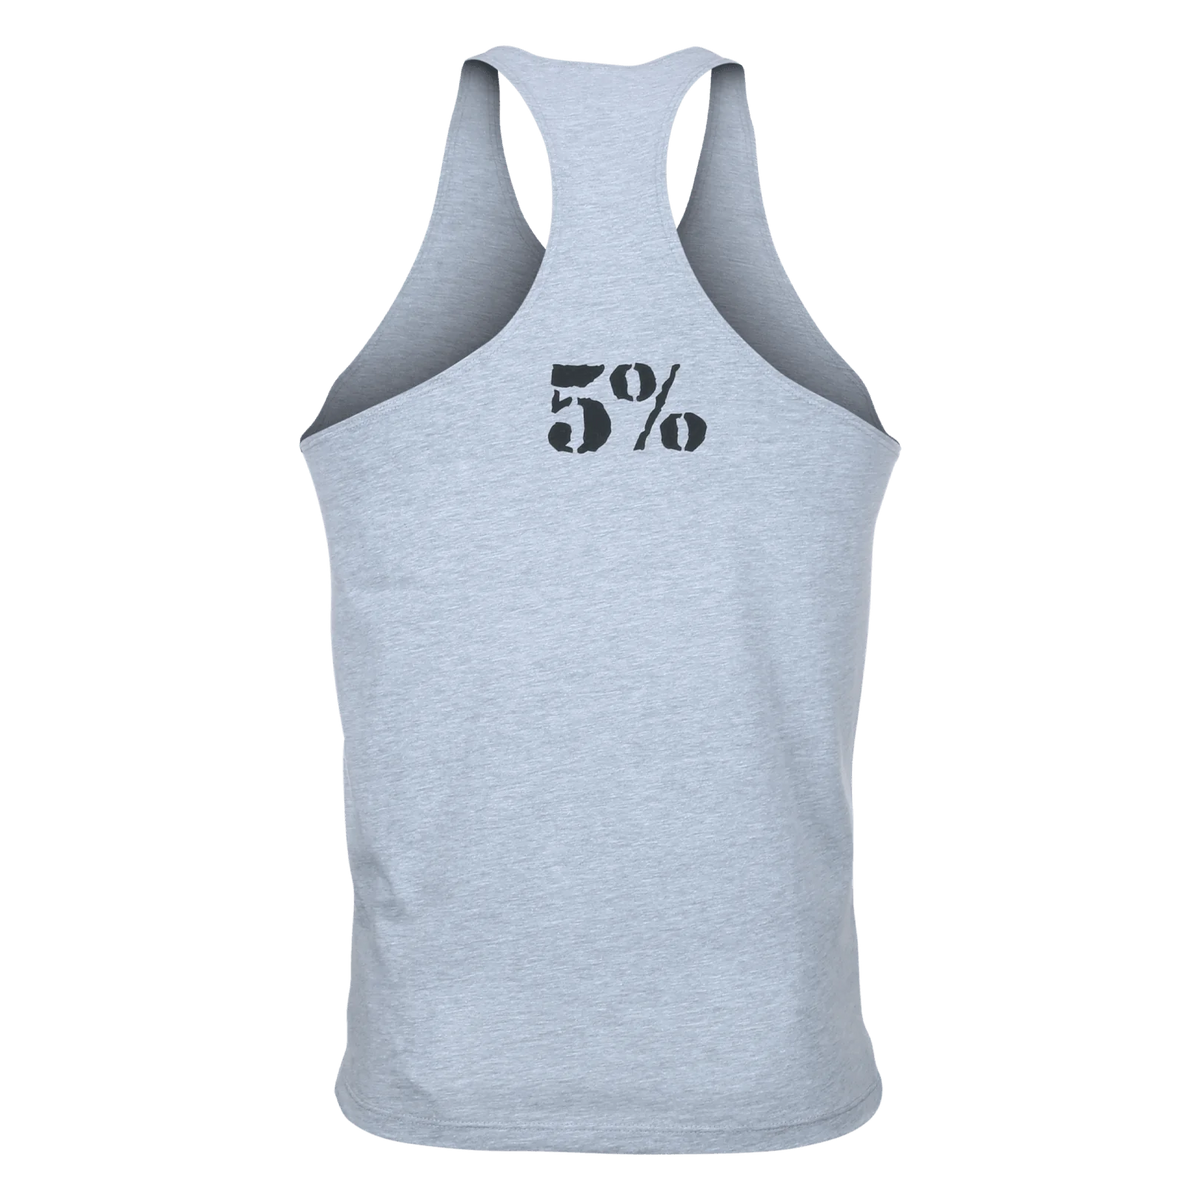 5% Nutrition - Whatever it takes Stringer - Grey